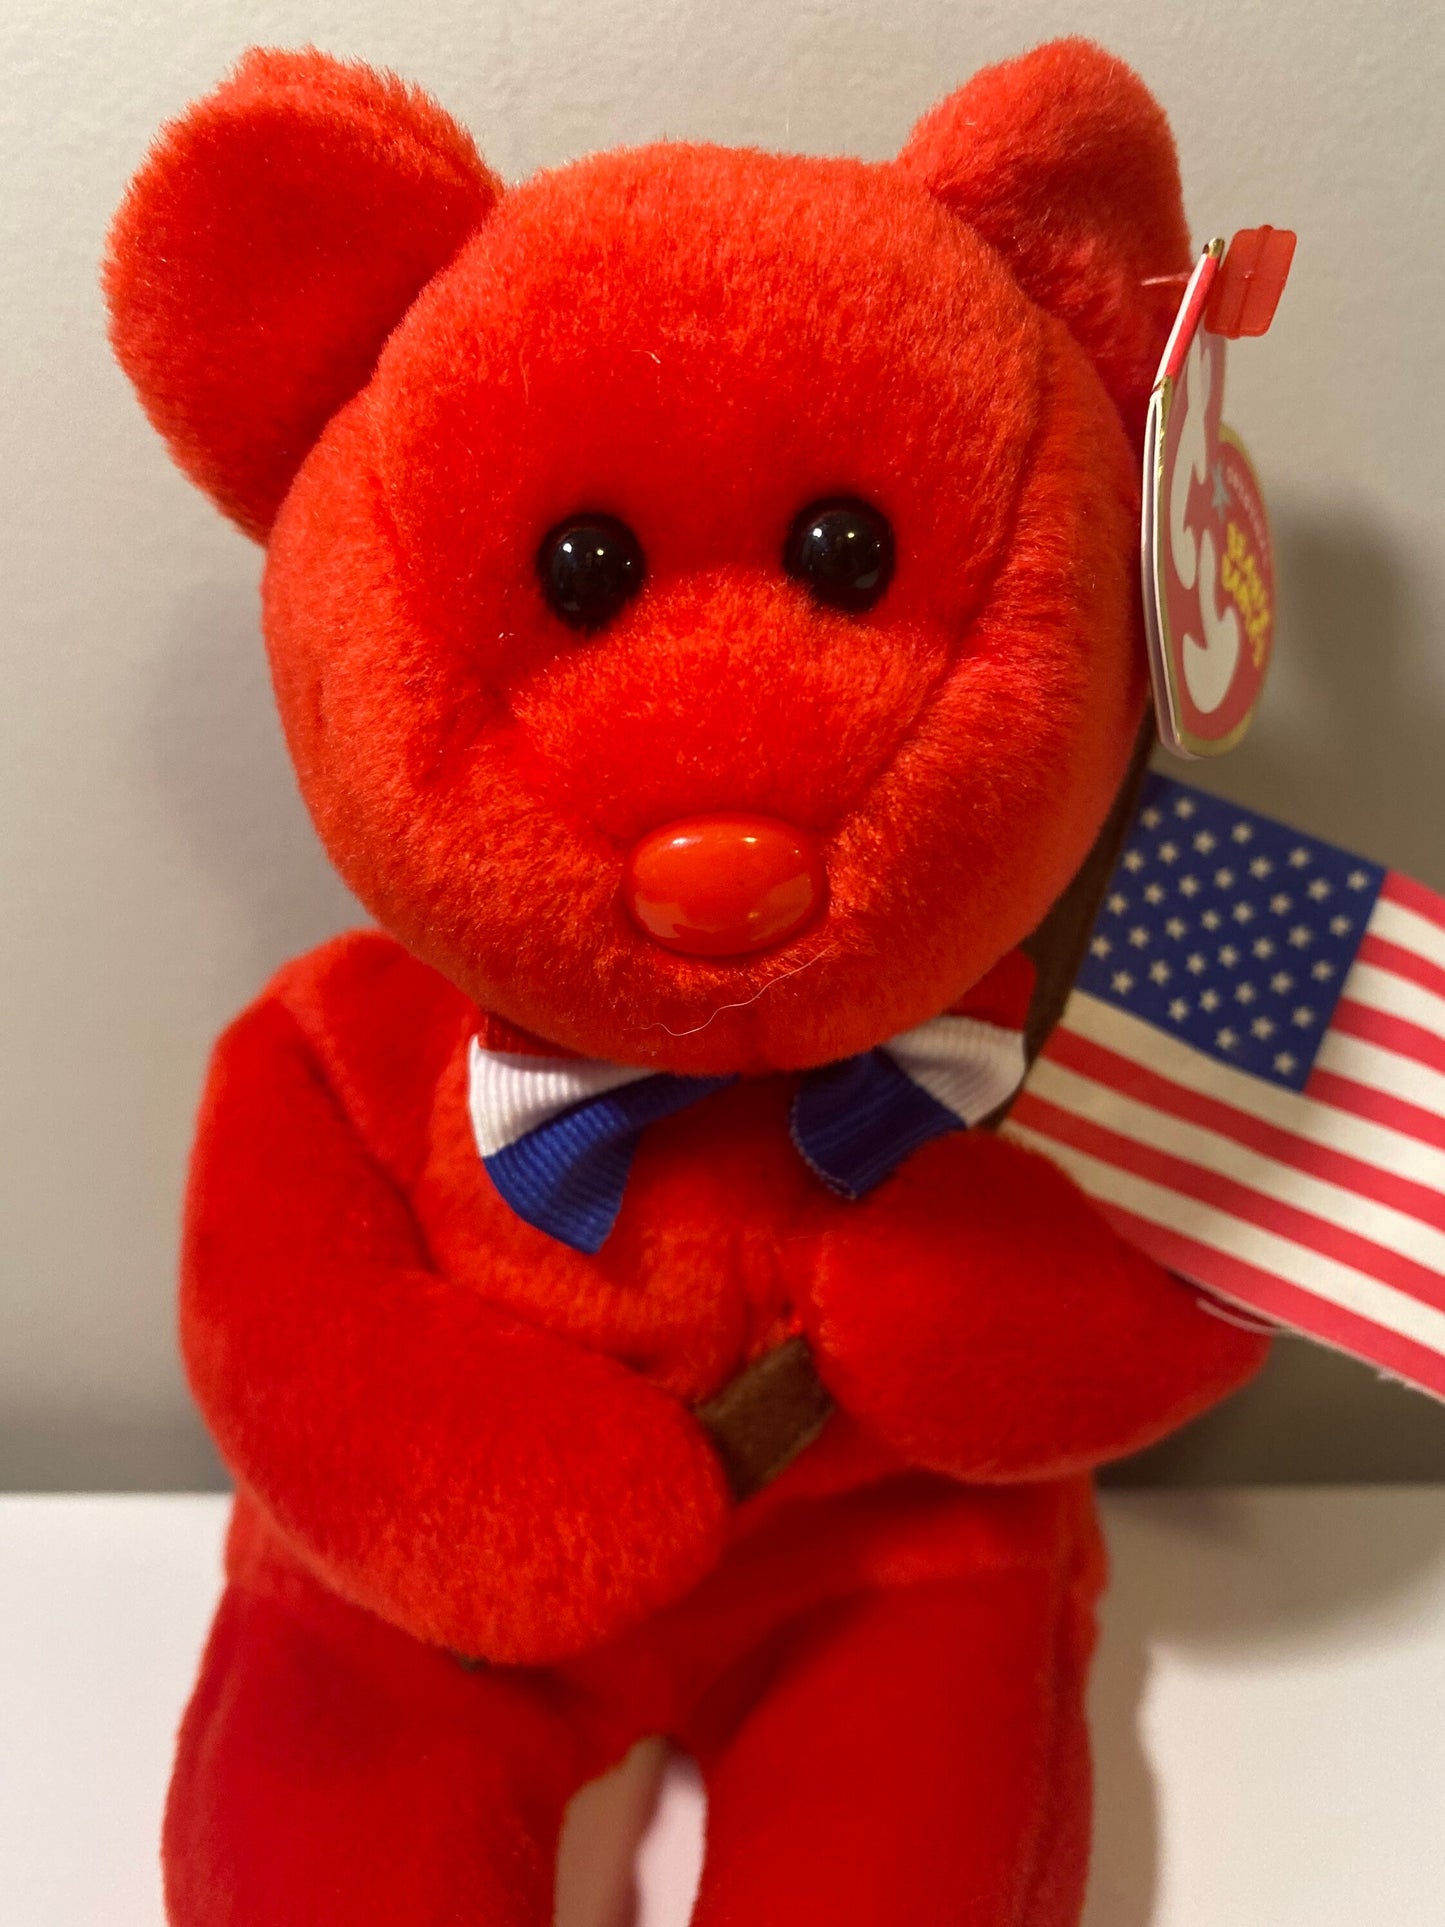 Ty Beanie Baby “Thomas” the Red USA Bear Plush Holding American Flag (8.5 inch)